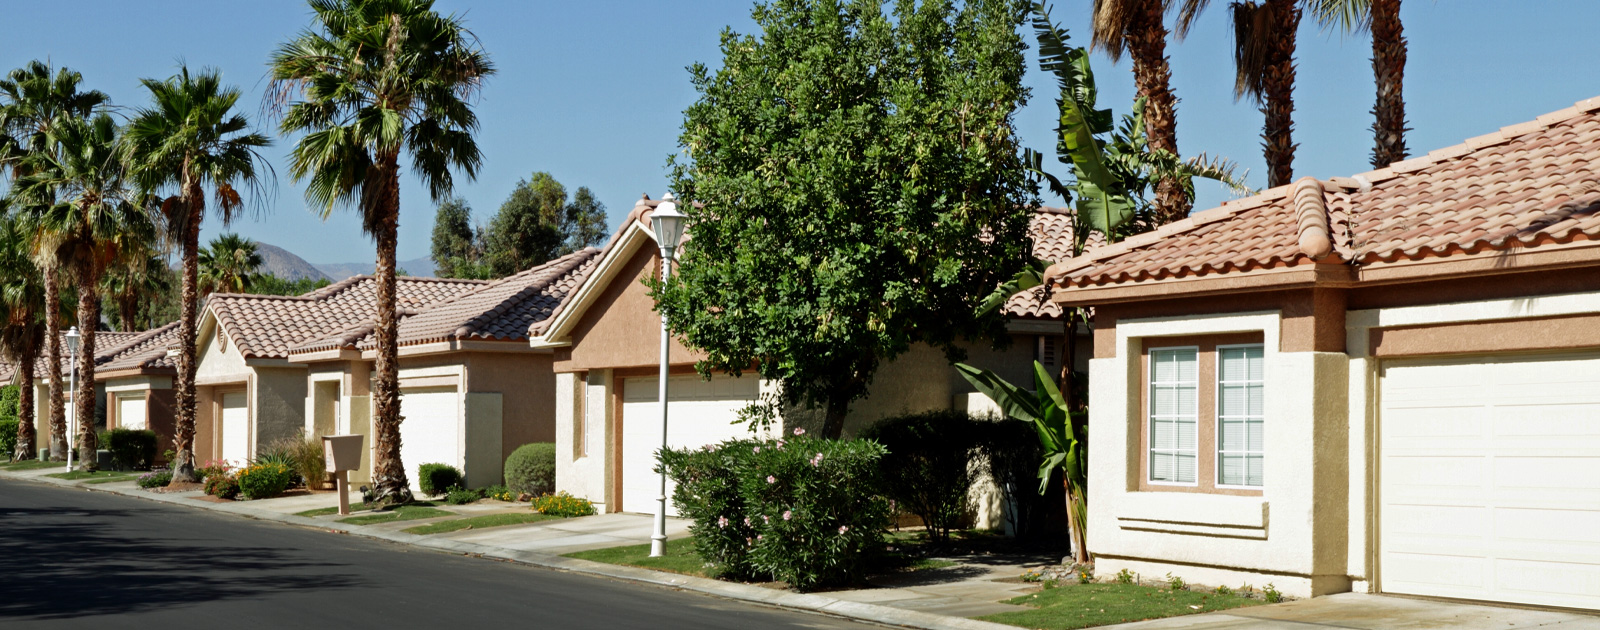 houses line a street in Coachella Valley